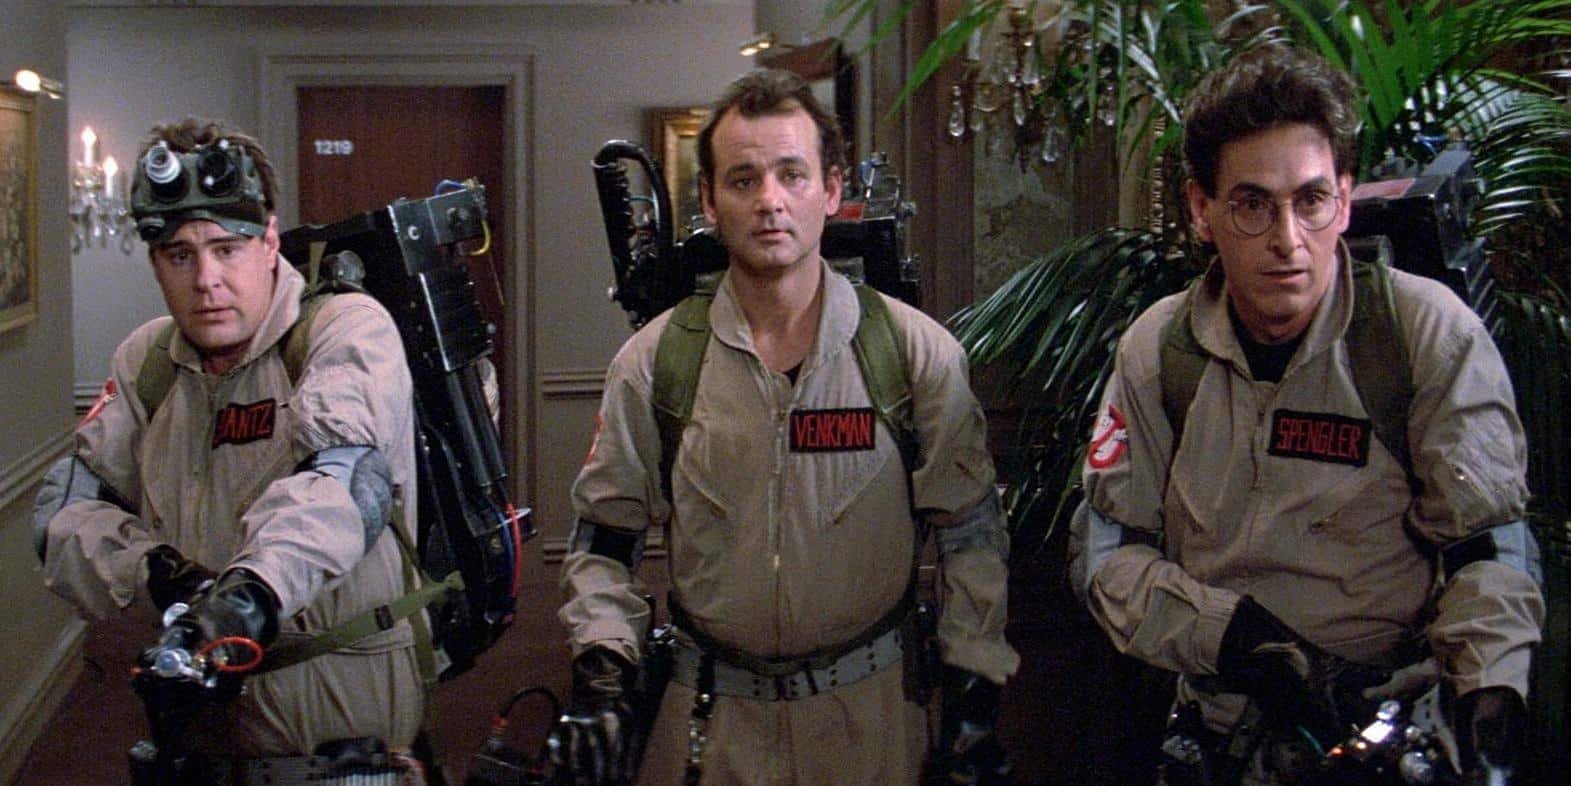 Ghostbusters Animated Series News! - Everything We Know So Far!